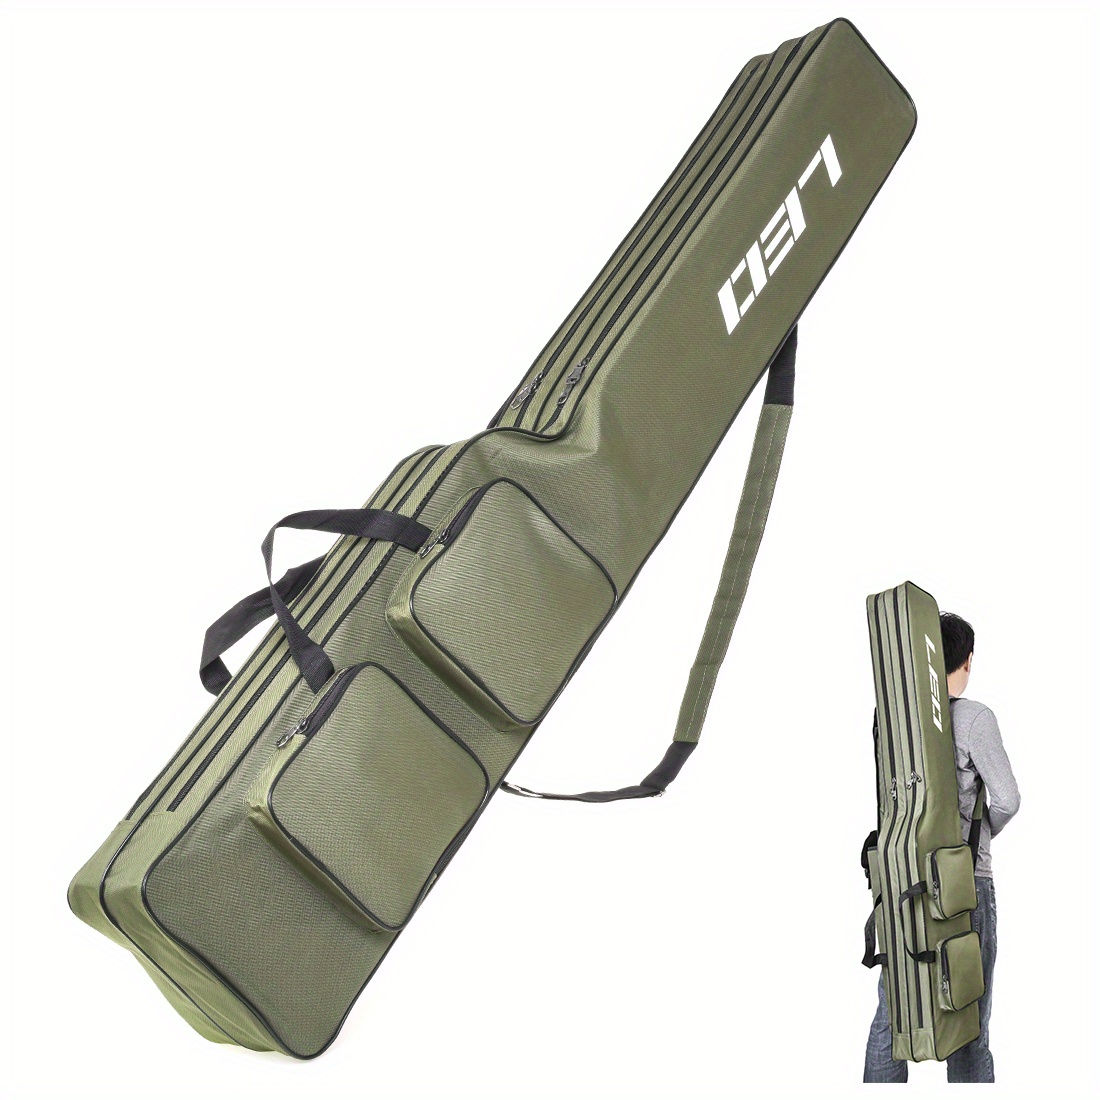 Multifunctional Hard Spinning Fishing Rod Bags Bag 234 Layers, 80CM X  130CM, Tackle 1680D Oxford Reel Gear Storage Case For Outdoor Activities  From Xuan09, $50.15